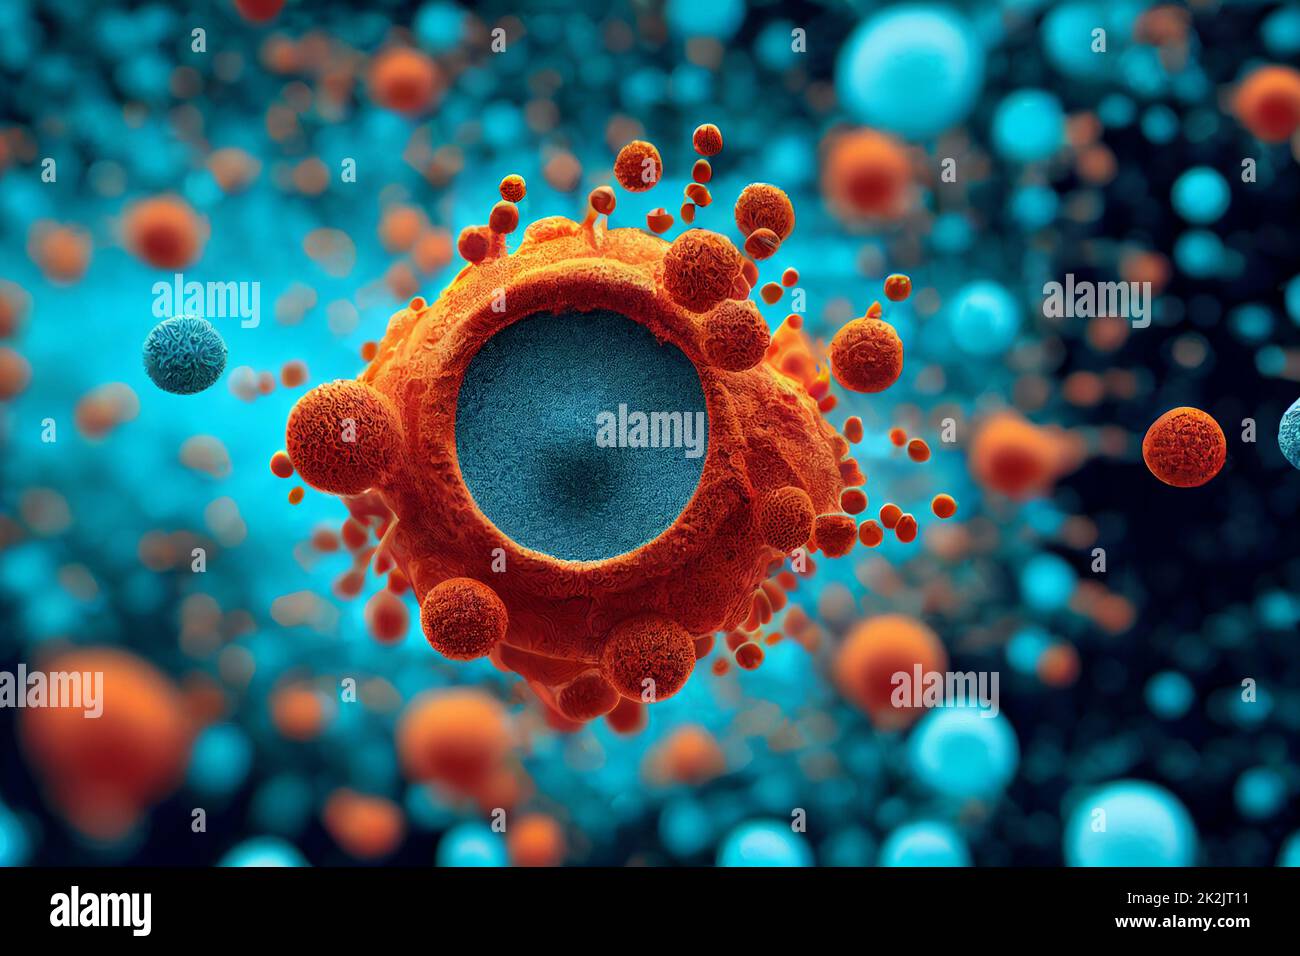 Colorful virus with surface receptors and spikes, covid-19 like virus, coronavirus type of resembling sars-cov-2, general virus concept 3d rendering Stock Photo